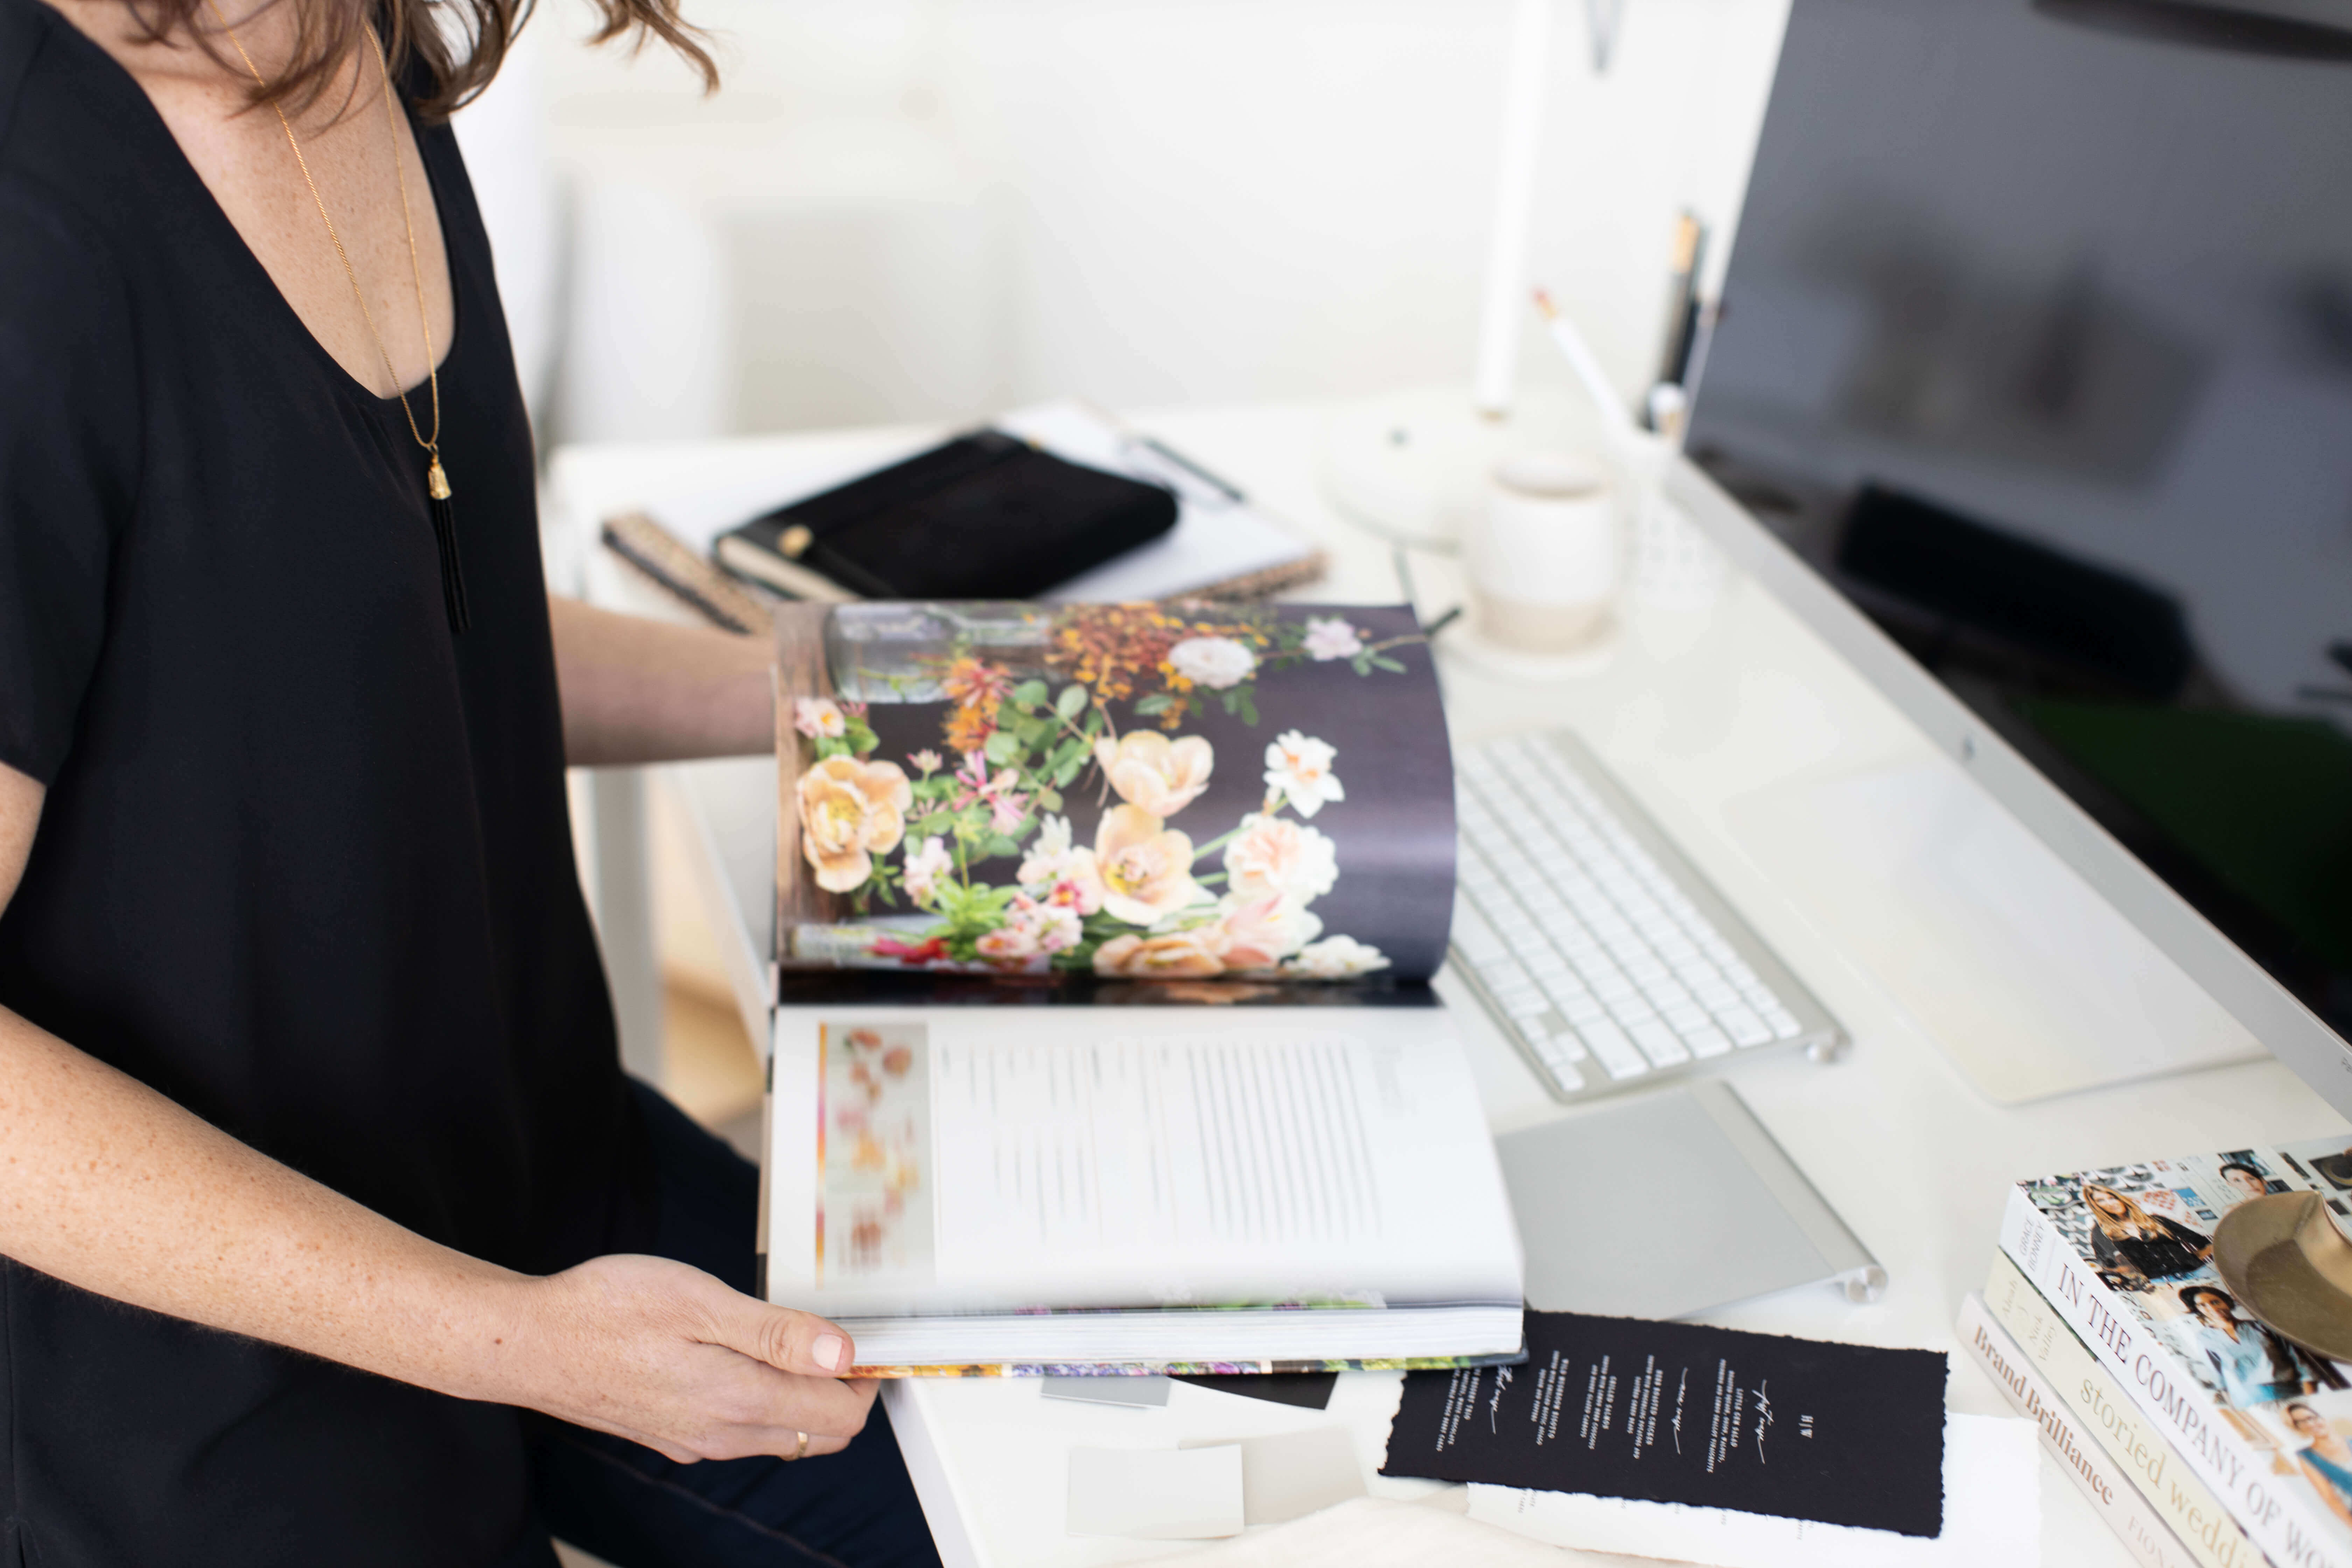 a lady with a black top reading wedding magazines in front of a laptop